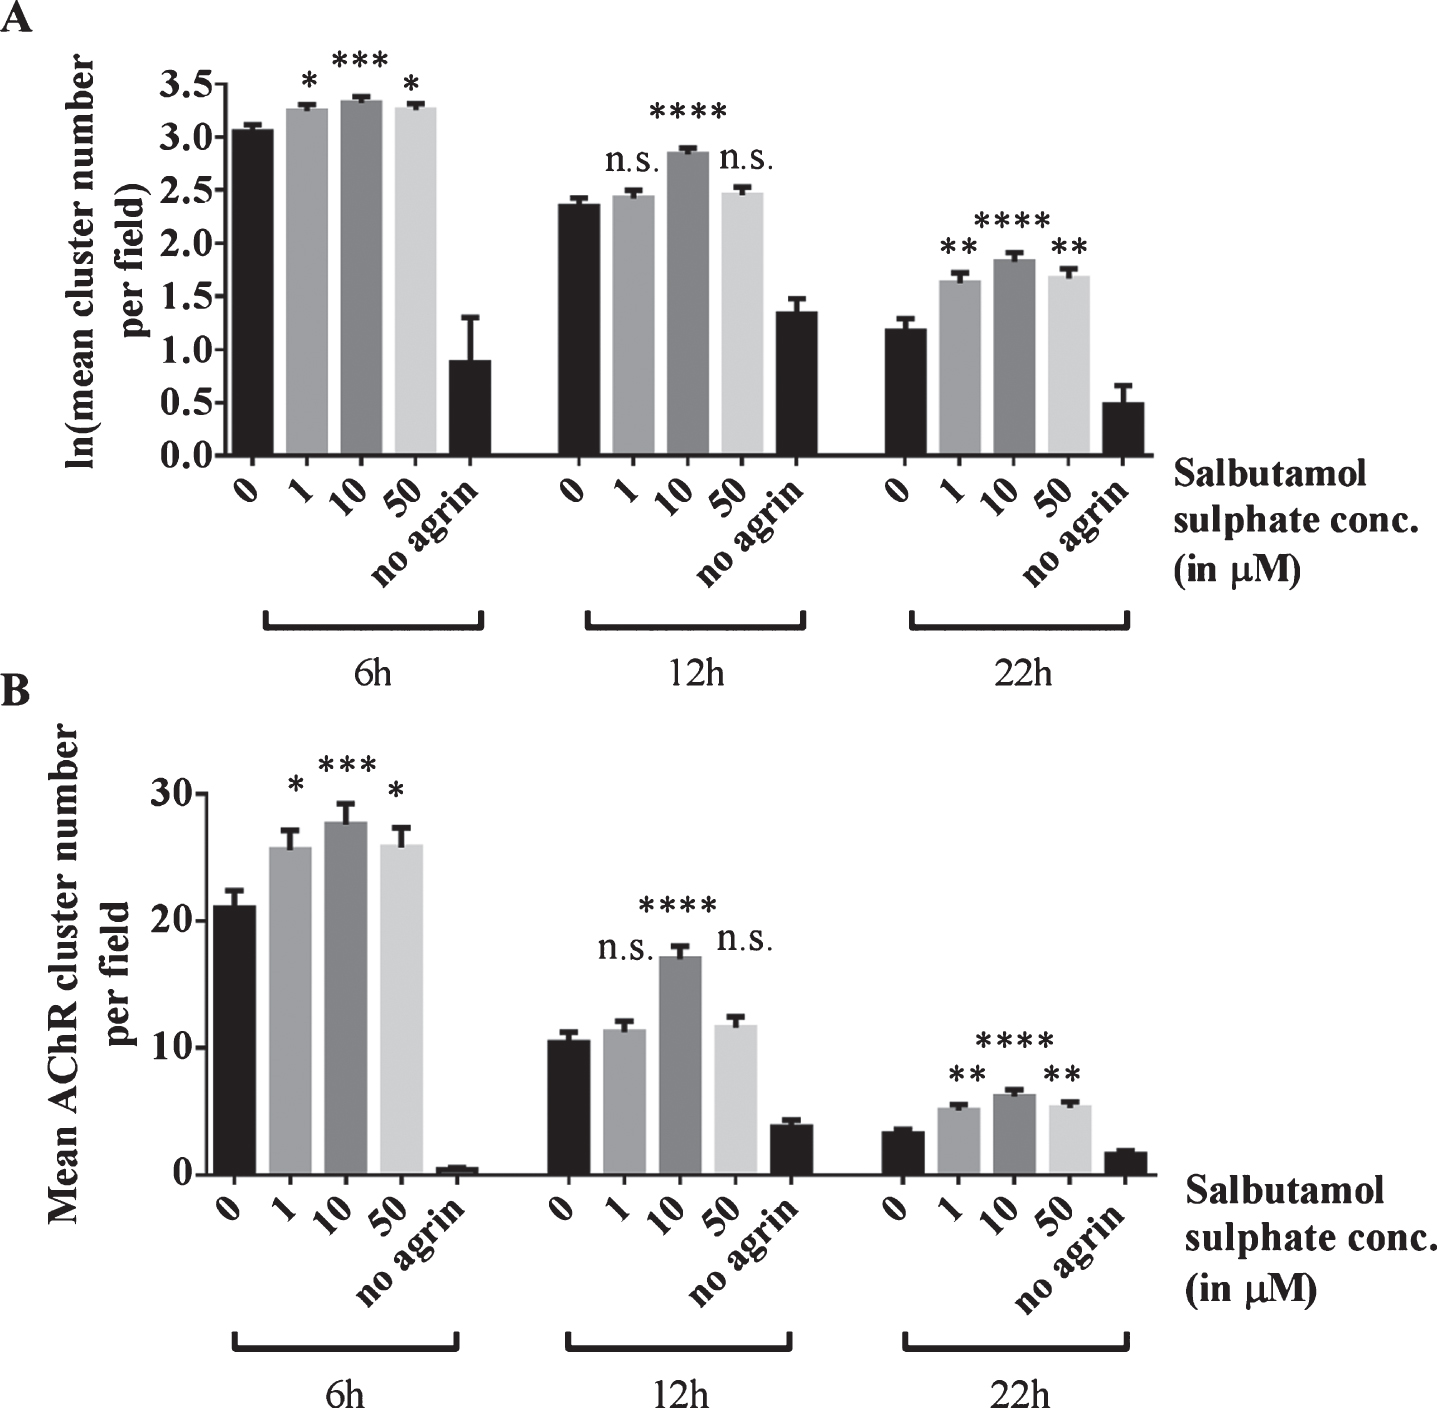 Effects of salbutamol on AChR clusters after agrin wash-off. (A) Clusters were induced by incubation of myotubes with 1:500 soluble short rat agrin. After agrin was removed, AChR clusters were left to disperse for 6, 12 or 22 h in the absence or presence of 1, 10 or 50 μM salbutamol sulphate. Significantly more clusters remained in salbutamol treated cells after a dispersal time of 6 h (difference = 0.2, SE = 0.07, p = 0.027, difference = 0.27, SE = 0.07, p = 0.0006, and difference = 0.2, SE = 0.07, p = 0.02, respectively; no agrin control: difference = 3.92, SE = 0.43, p < 0.00005), 12 h (difference = 0.08, SE = 0.11, p > 0.99, difference = 0.49, SE = 0.1, p < 0.00005, and difference = 0.11, SE = 0.11, p = 0.98, respectively; no agrin control: difference = 1.01, SE = 0.16, p < 0.00005) and 22 h (difference = 0.08, SE = 0.11, p > 0.99, difference = 0.49, SE = 0.1, p < 0.00005, and difference = 0.11, SE = 0.11, p = 0.98, respectively; no agrin control: difference = 1.01, SE = 0.16, p < 0.00005). (B) Data shown in A back-transformed into cluster numbers. N = 3 (6 and 22 h), N = 2 (12 h). Error bars indicate the standard error of the mean. n.s.p > 0.05, *p≤0.05, **p≤0.01, ***p≤0.001, ****p≤0.0001.